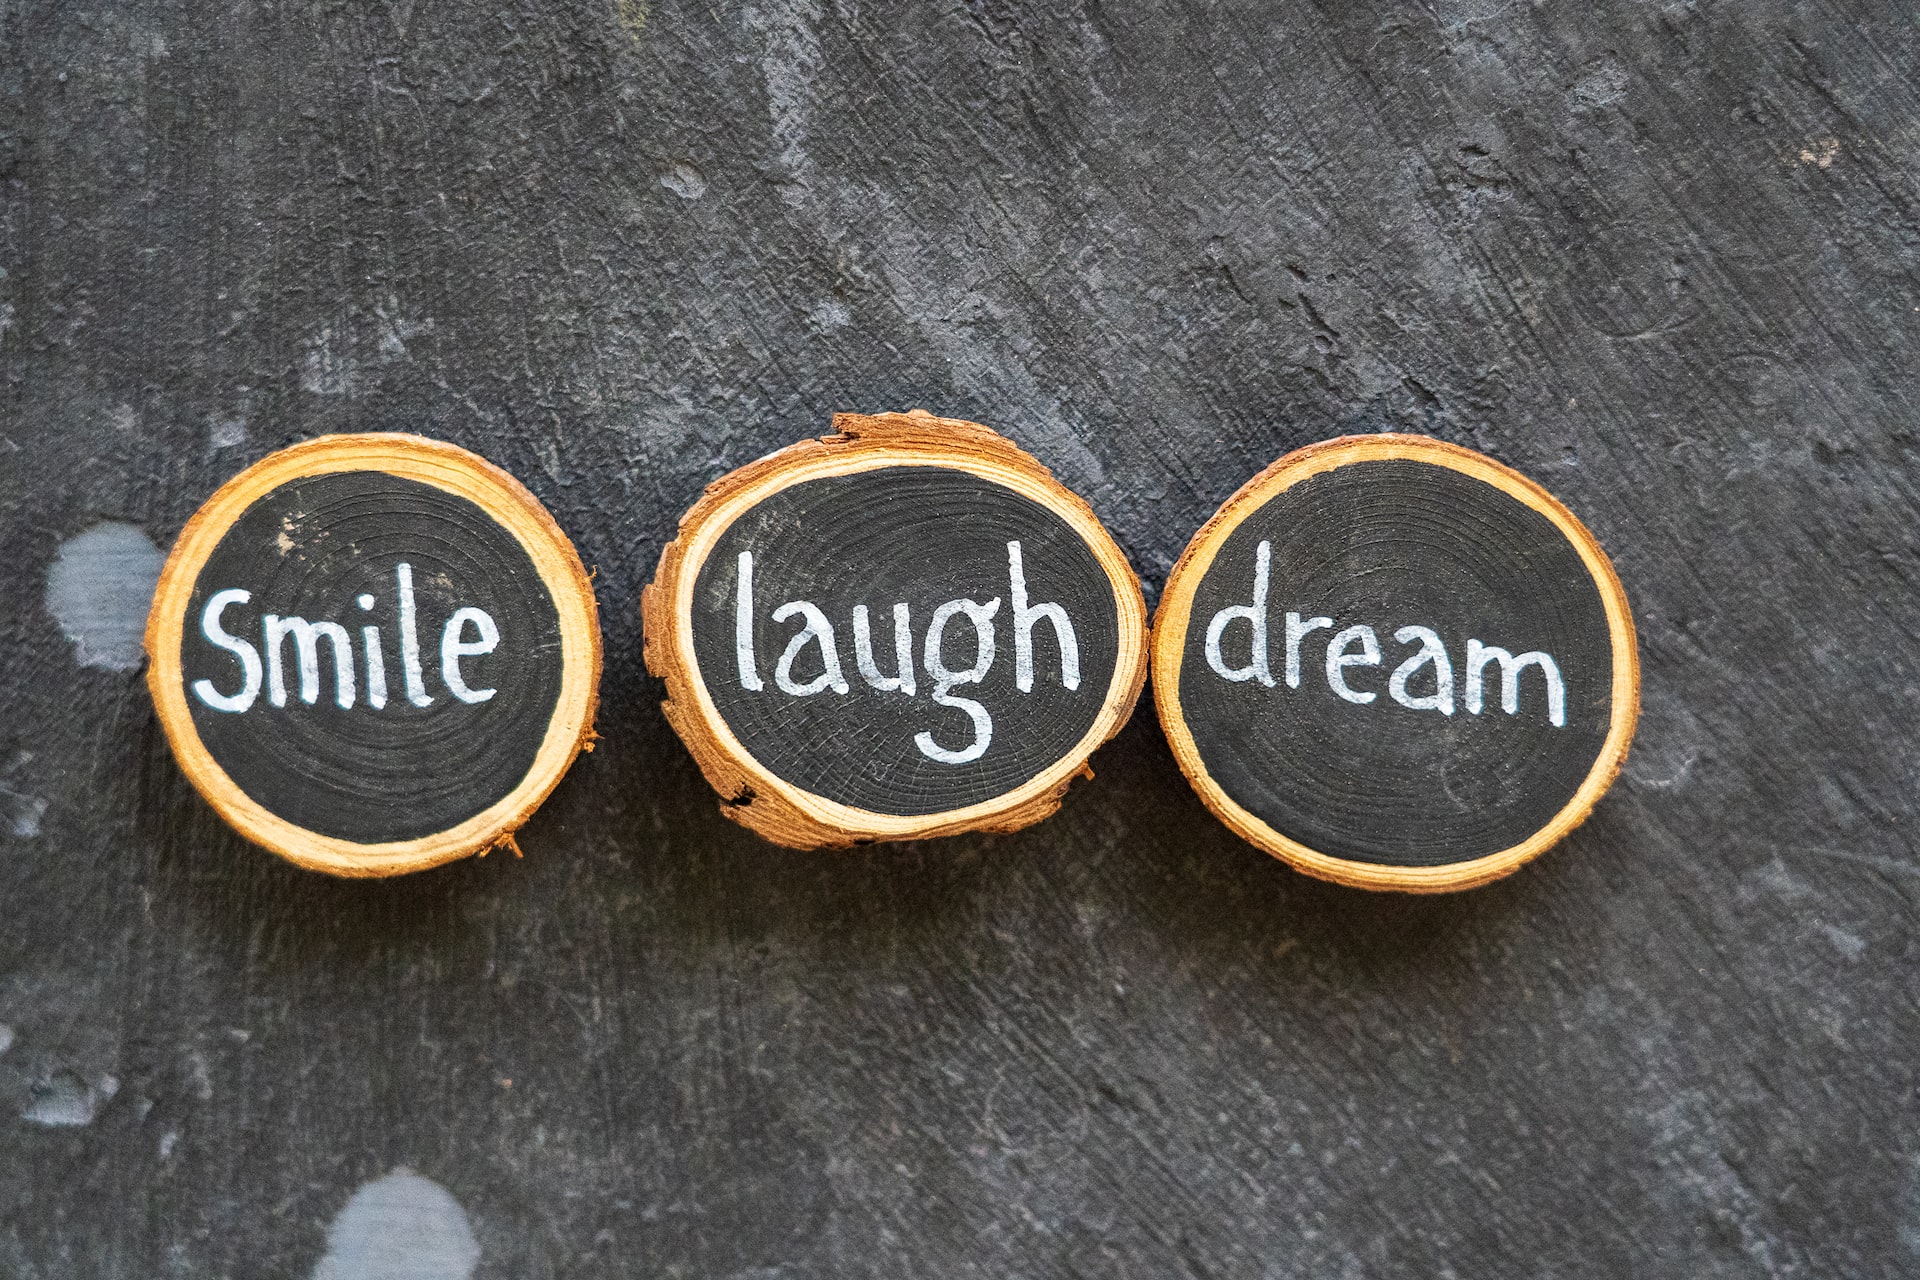 Smile, laugh and dream to strengthen your mental health